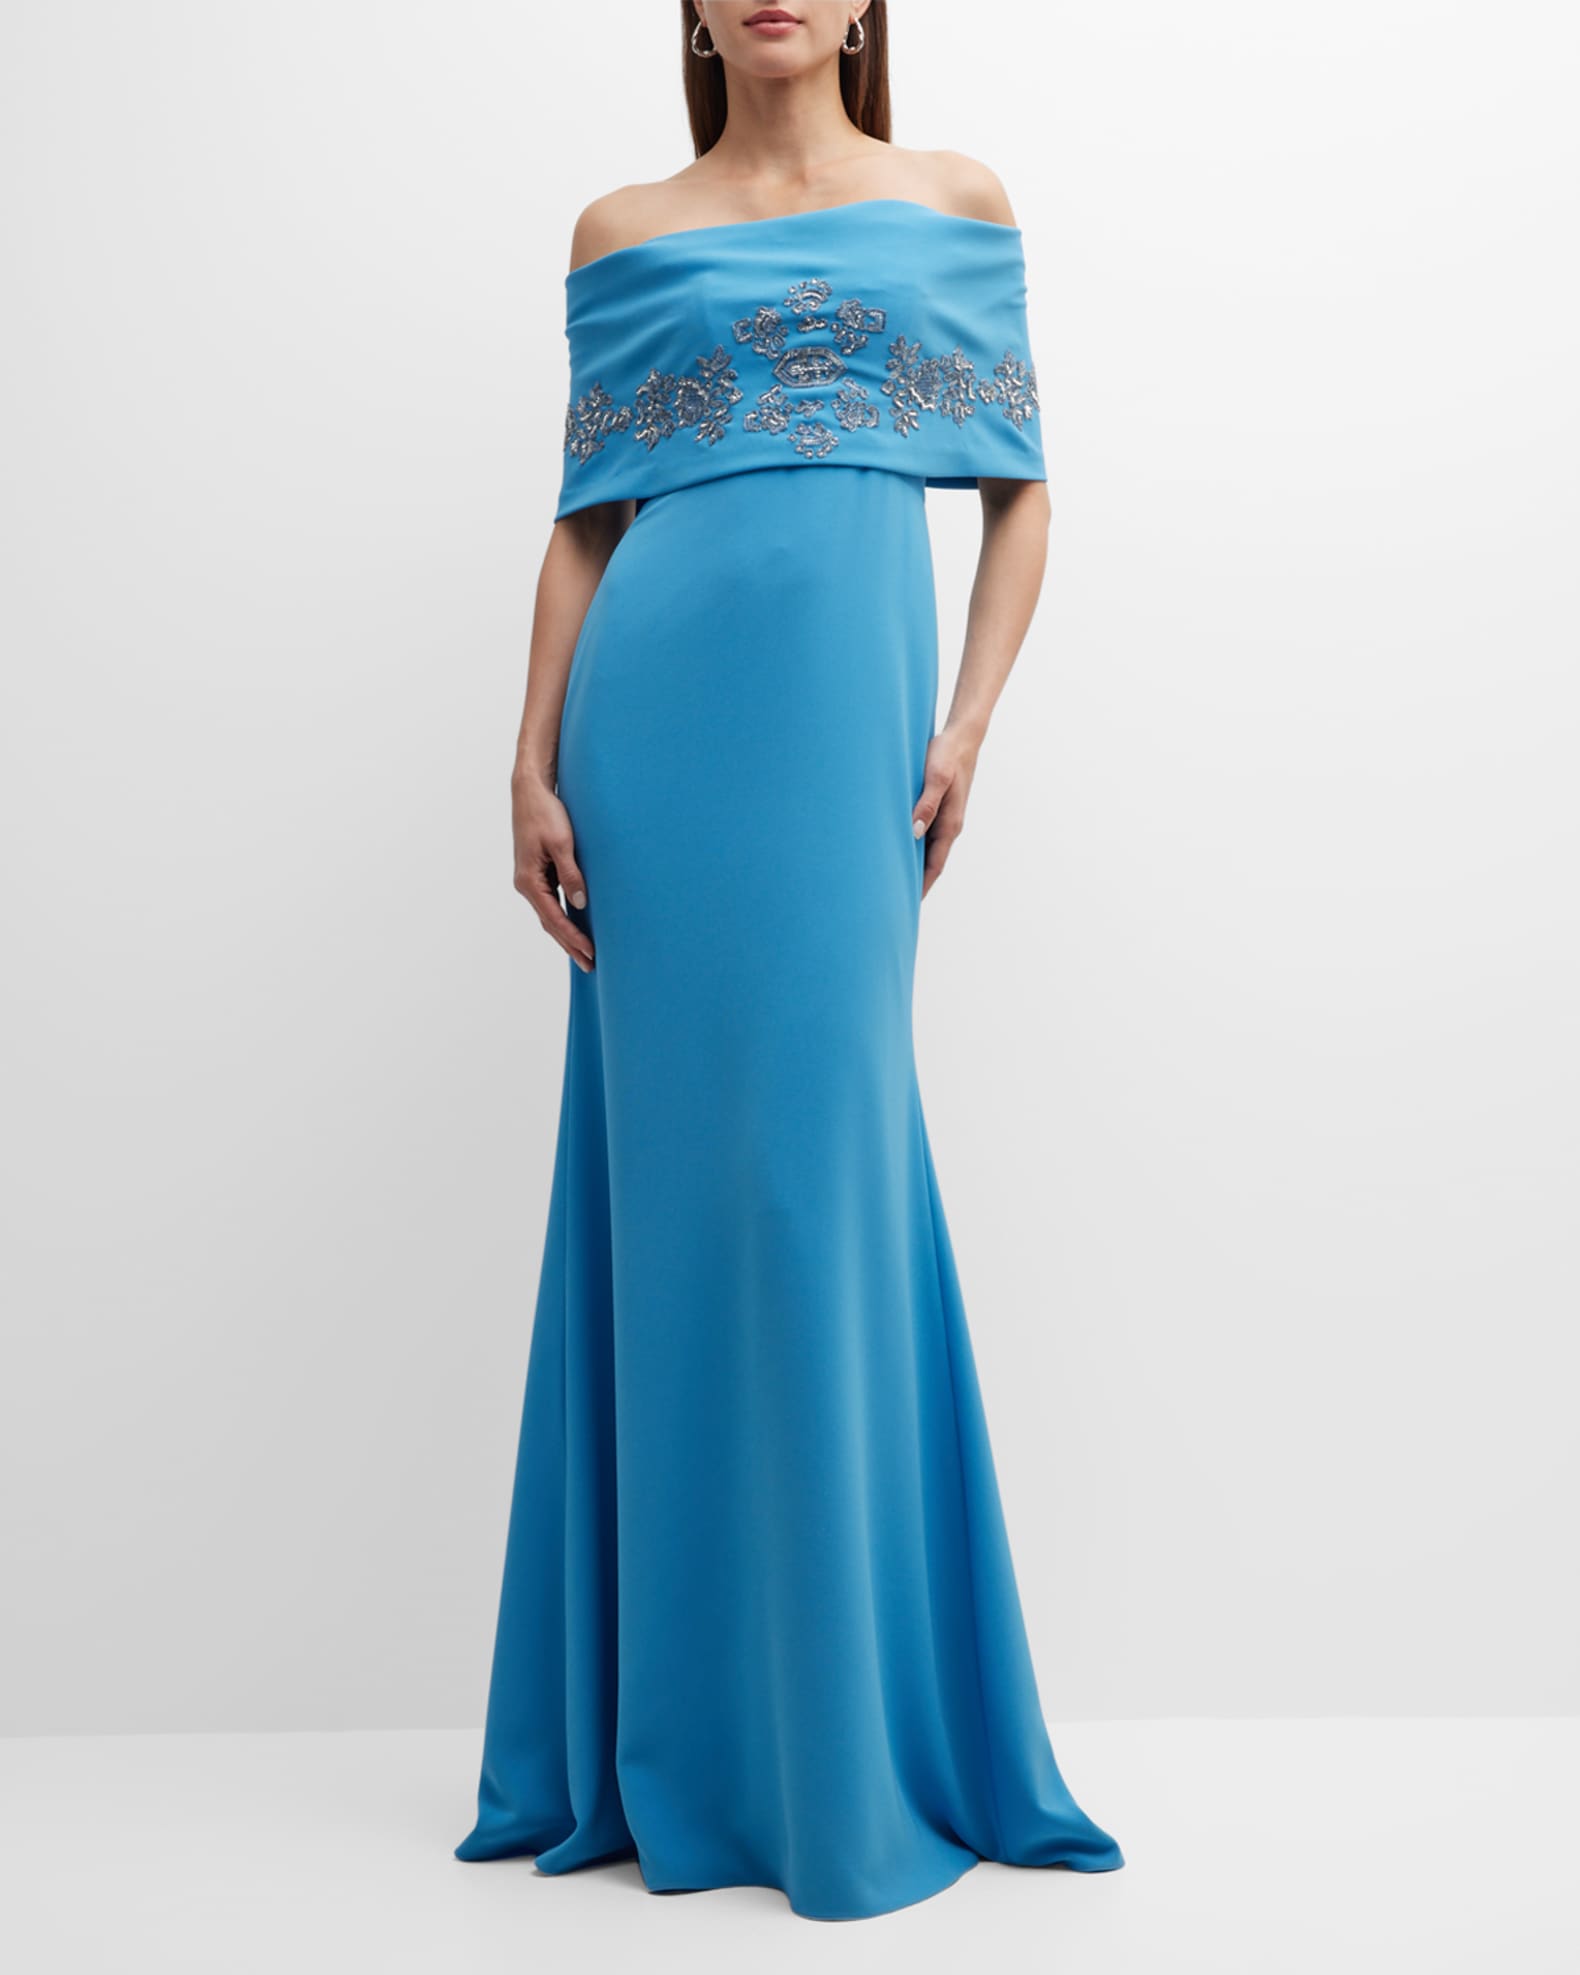 Lela Rose Off-Shoulder Gown with Beaded Embellishments | Neiman Marcus